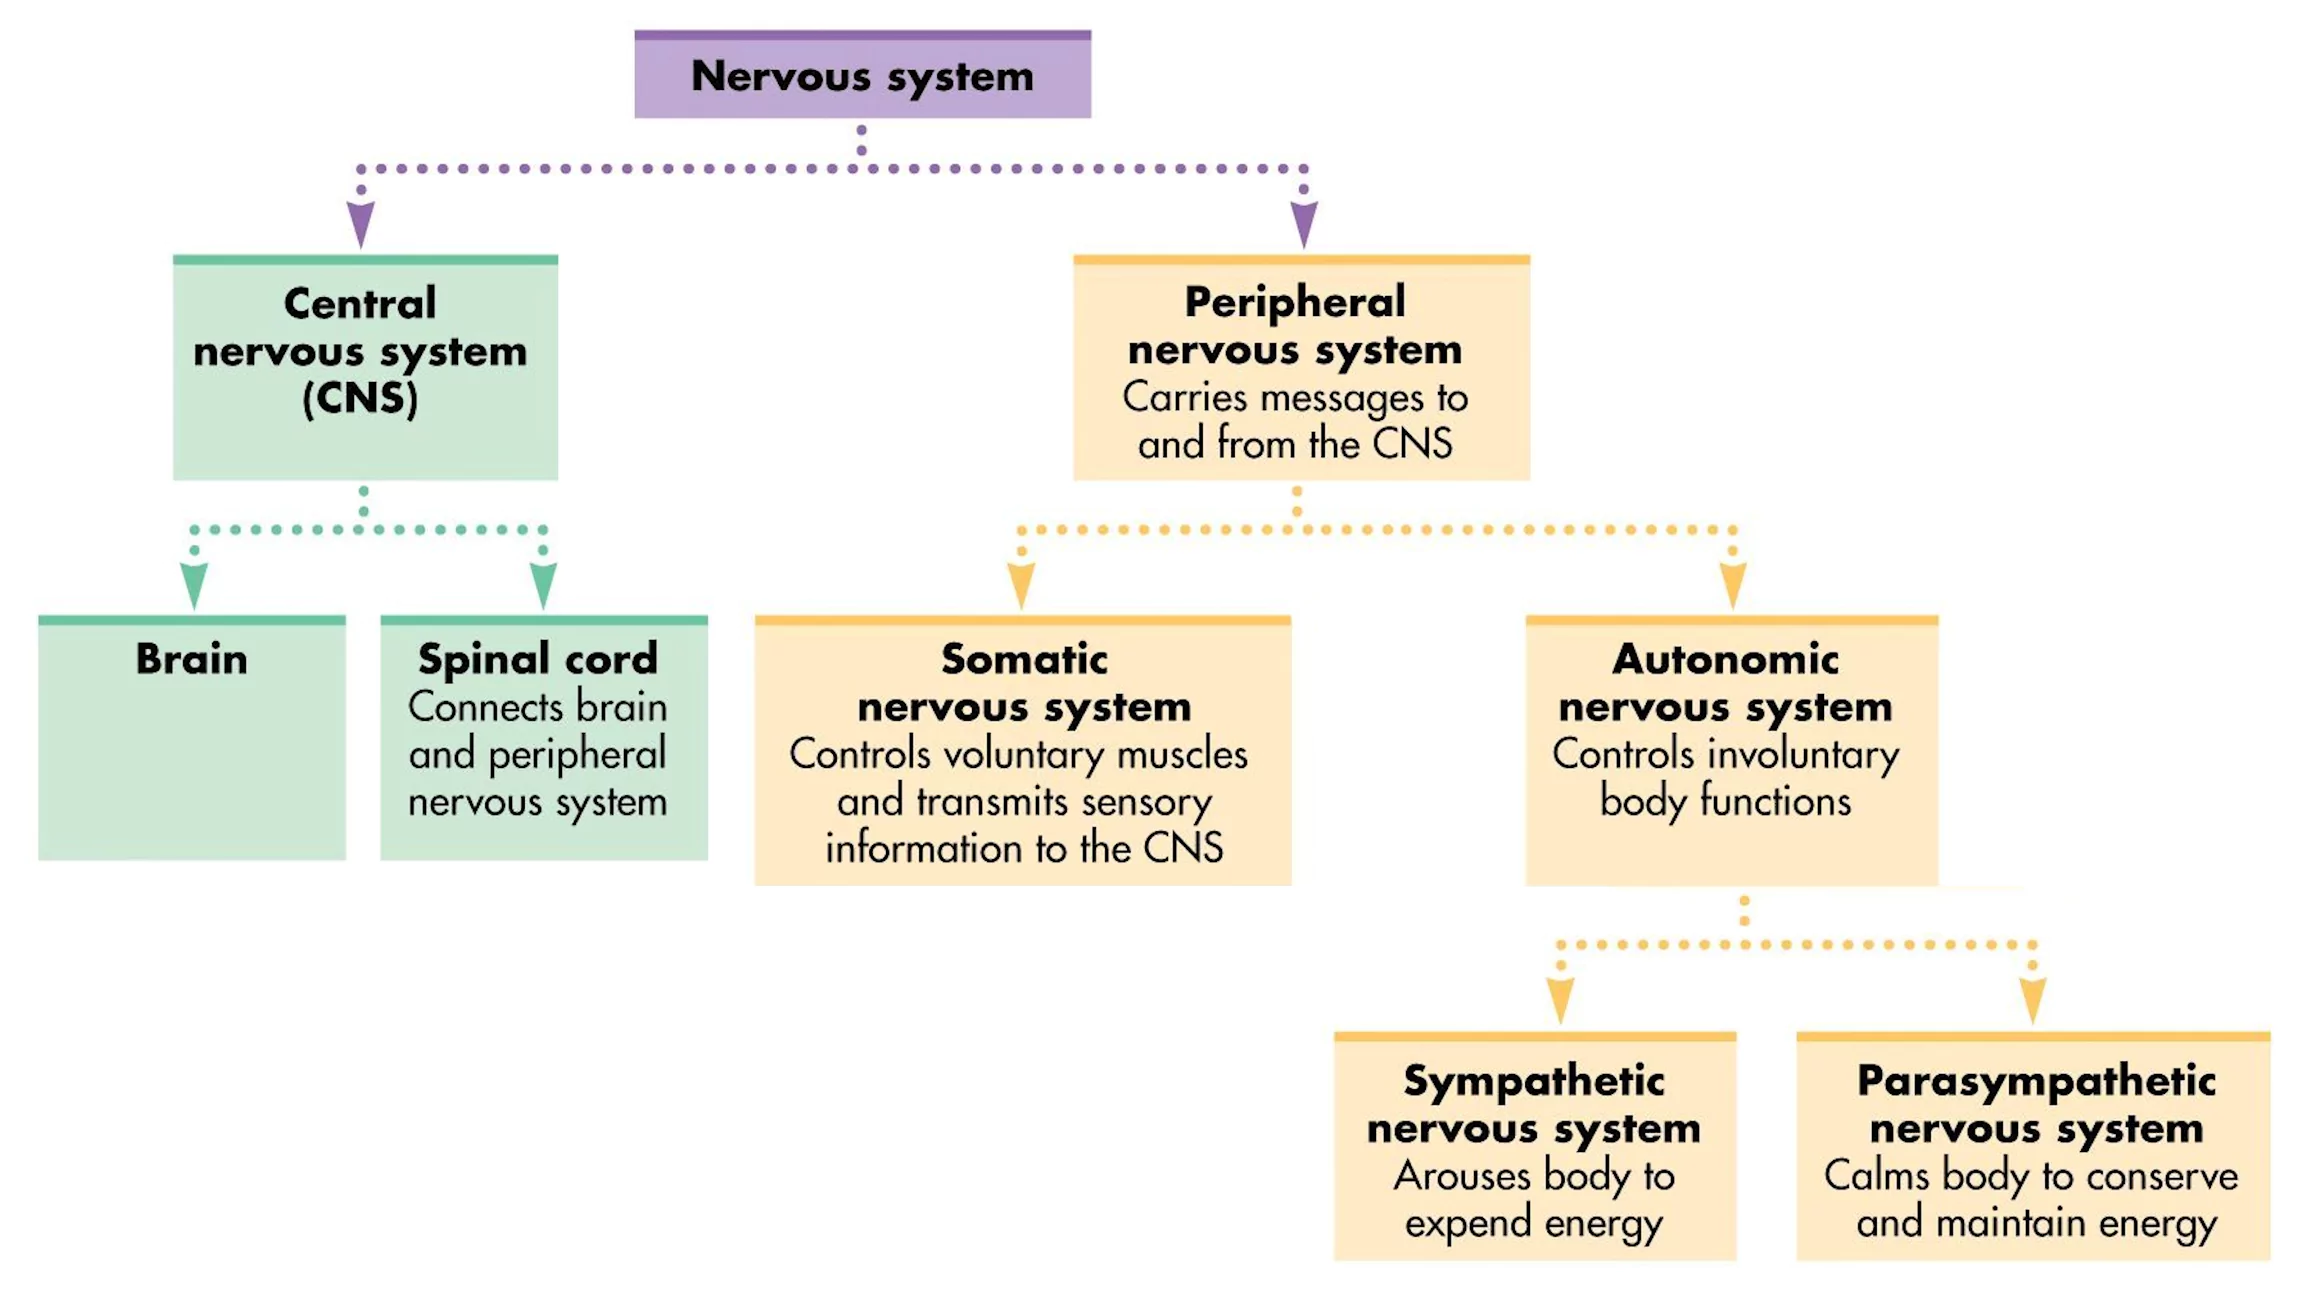 Diagram of the nervous system showing its divisions: Central Nervous System (brain and spinal cord) and Peripheral Nervous System (somatic and autonomic, with the latter including sympathetic and parasympathetic).